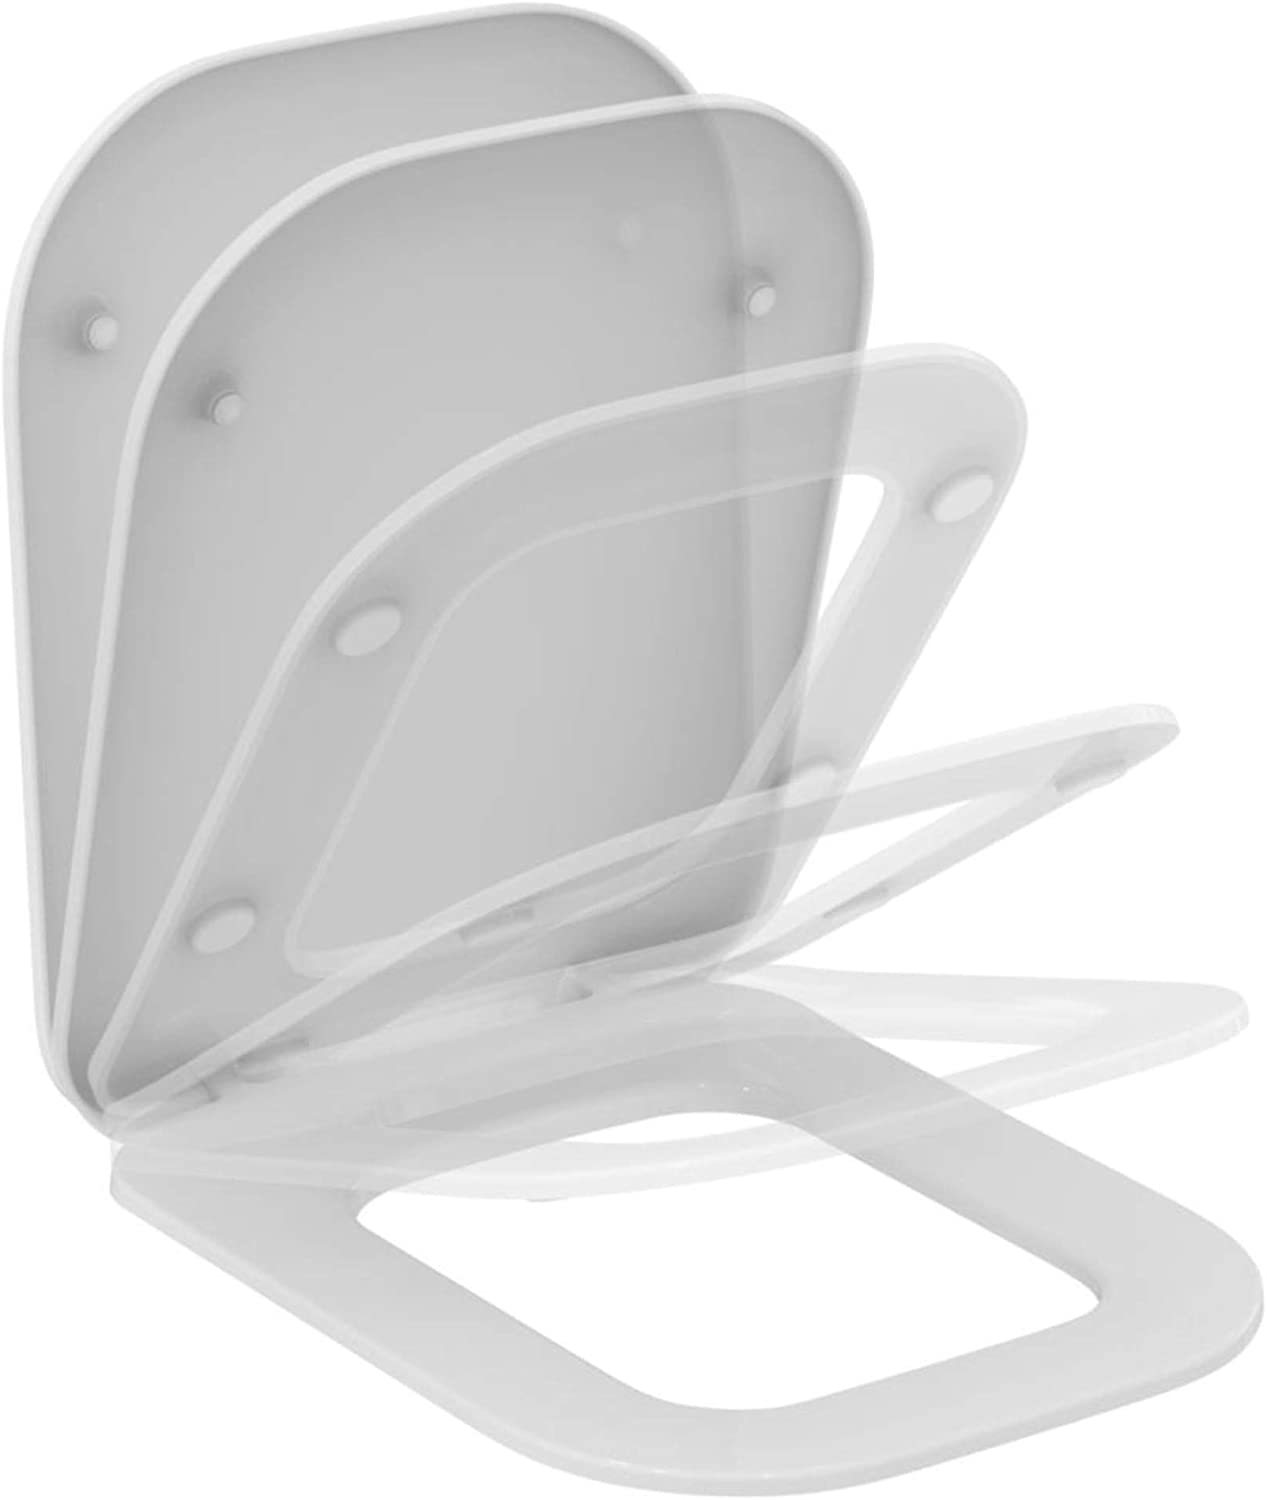 Picture of IDEAL STANDARD Tonic II toilet seat with cover and soft closing K706501 white